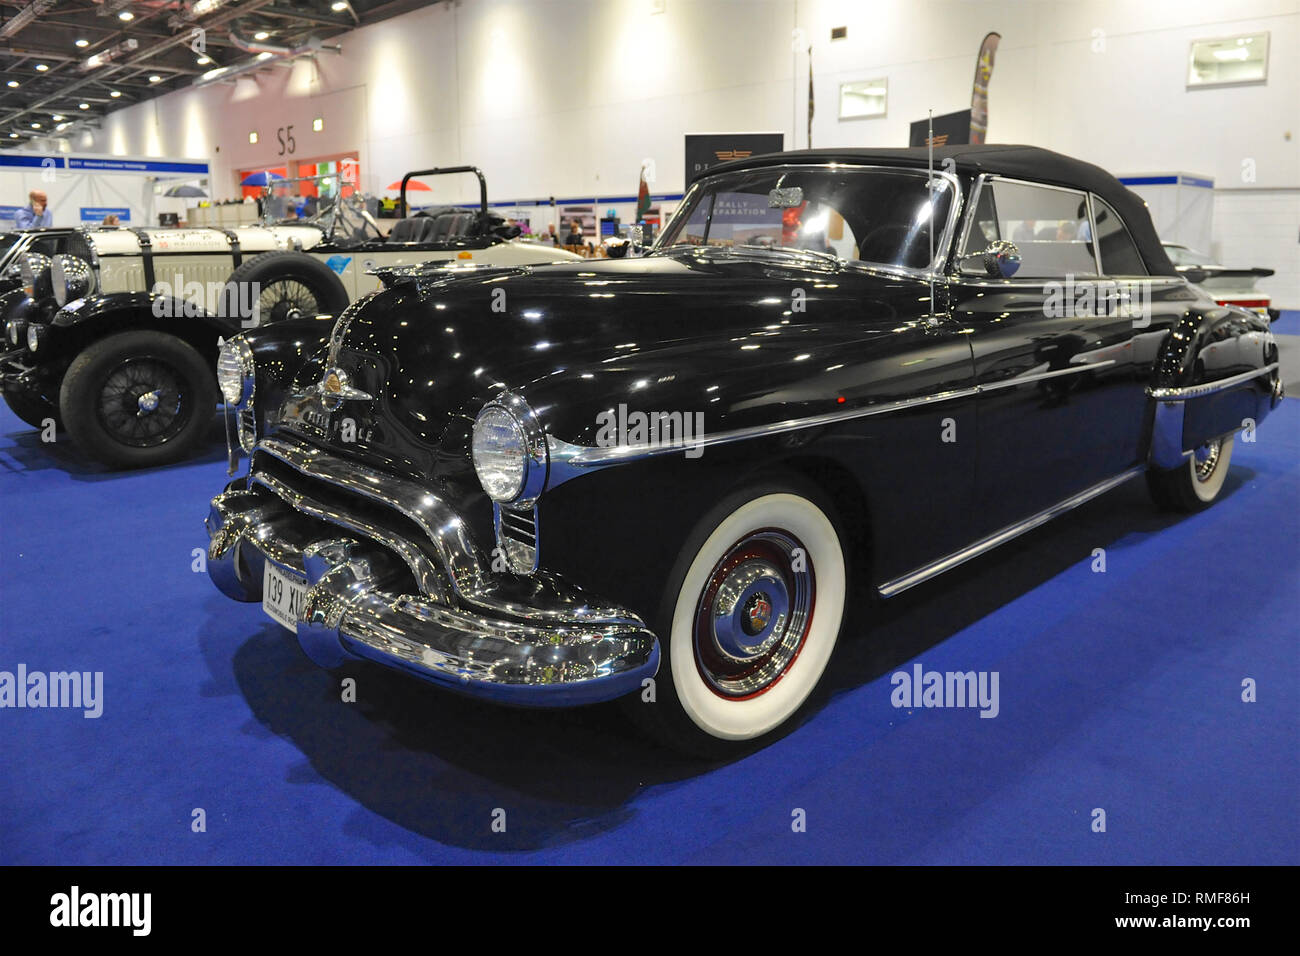 ExCel London, UK. 14th Feb 2019. London, UK. 14th Feb, 2019. A 1950 Oldsmobile 'Rocket' 88 Convertible on display at the London Classic Car Show which is taking place at ExCel London, United Kingdom.  Around 700 of the world's finest classic cars are on display at the show ranging from vintage pre-war tourers to a modern concept cars. The show brings in around 37,000 visitors, ranging from serious petrol heads to people who just love beautiful and classic vehicles. Credit: Michael Preston/Alamy Live News Stock Photo